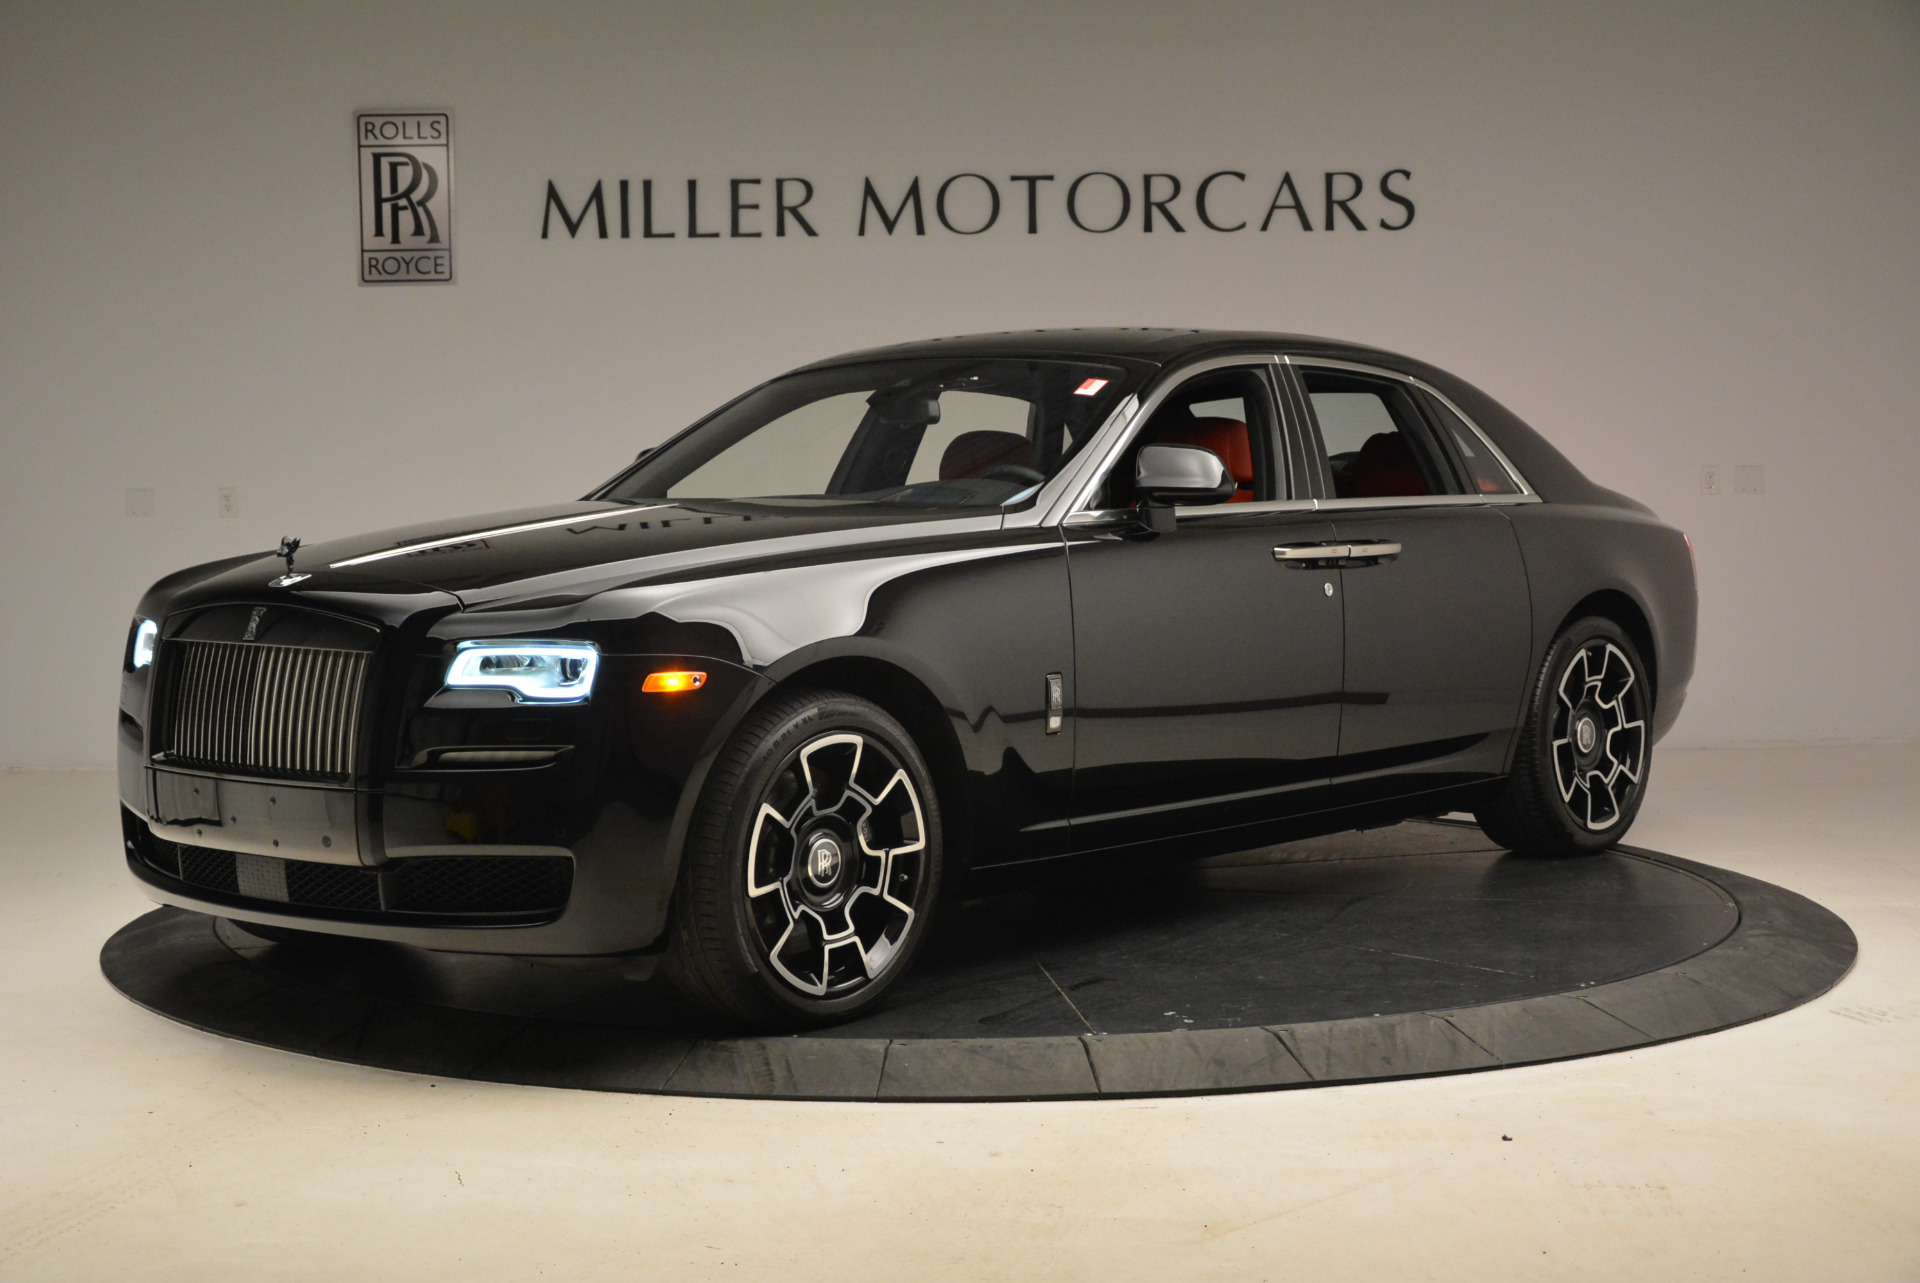 Used 2017 Rolls-Royce Ghost Black Badge for sale Sold at Bentley Greenwich in Greenwich CT 06830 1